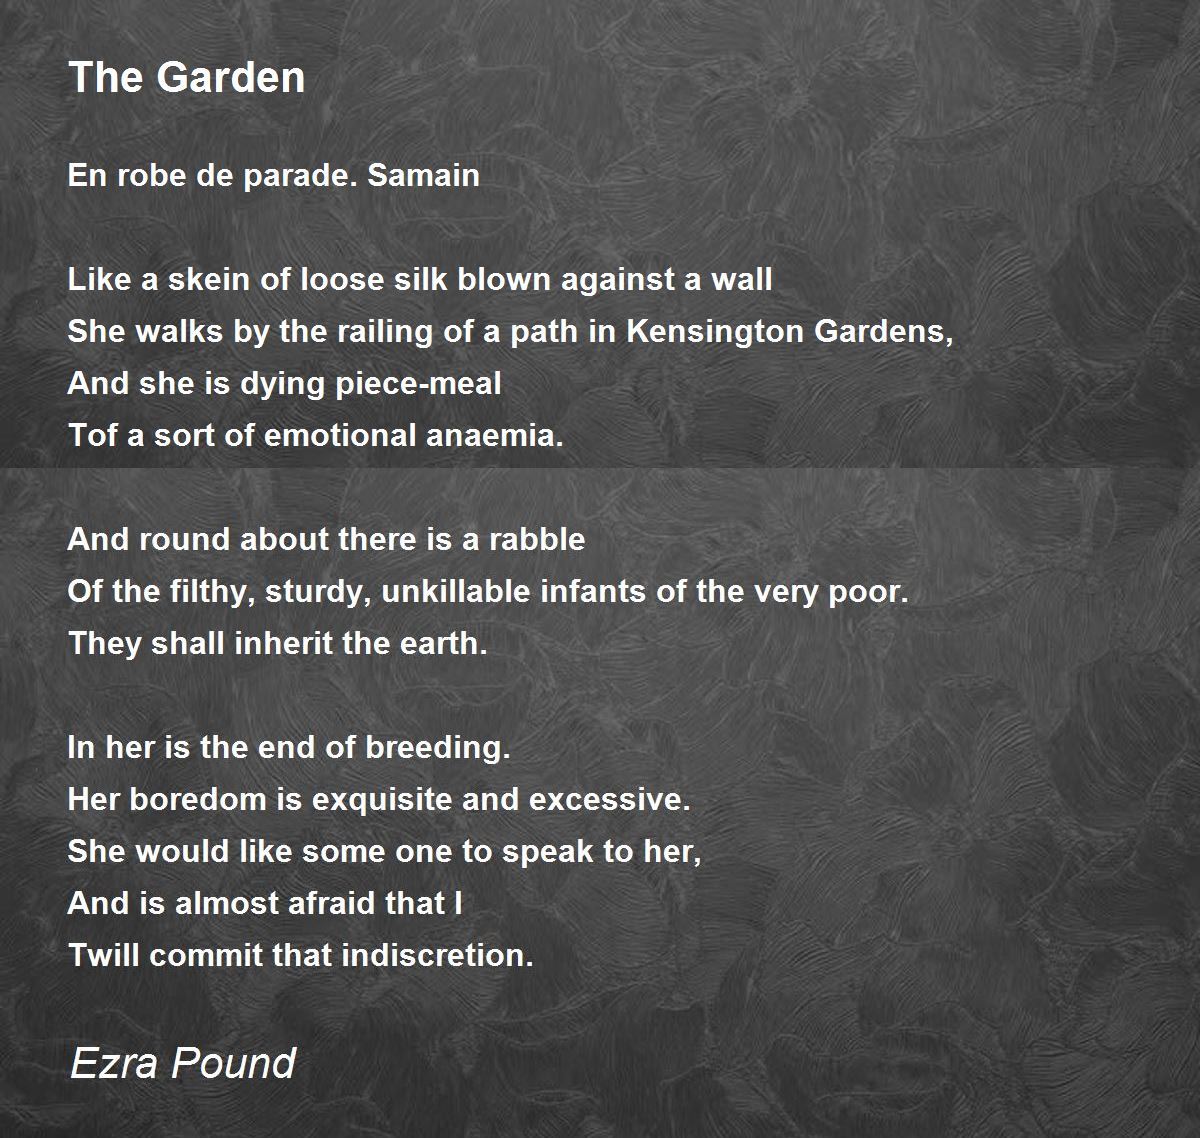 Modernism By The Realist The Garden By Ezra Pound Poem